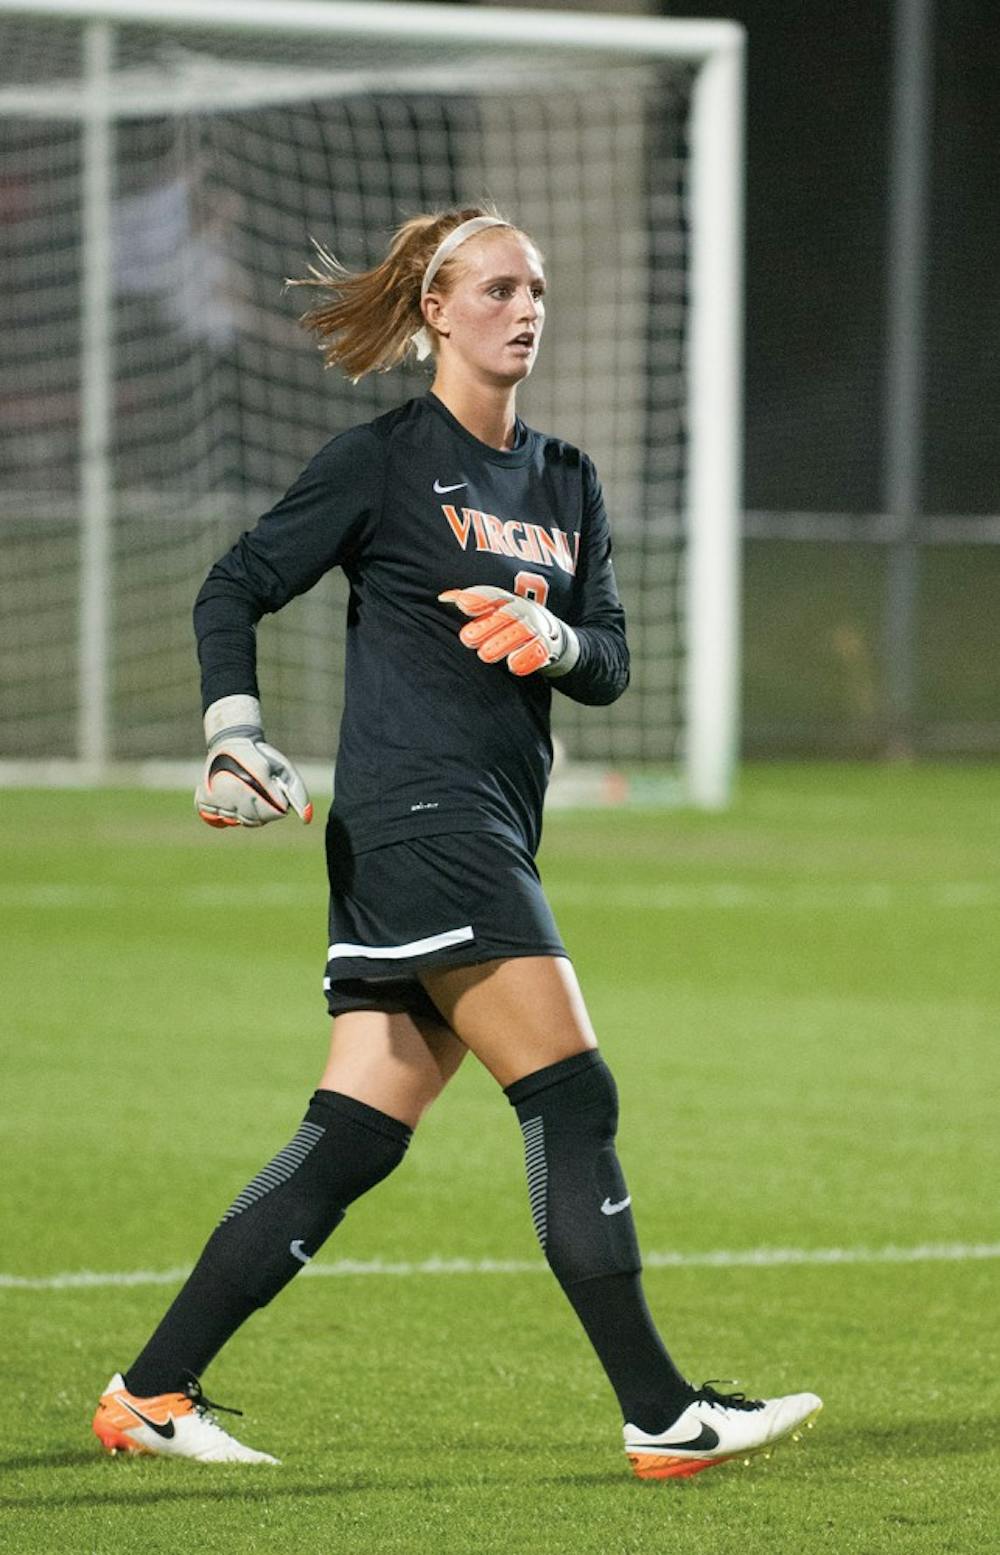 <p>Senior goalkeeper Morgan Stearns and the Cavaliers&nbsp;concluded their season, and her&nbsp;career, Sunday with a 2-0 loss to Georgetown in the NCAA Tournament's third round.&nbsp;</p>